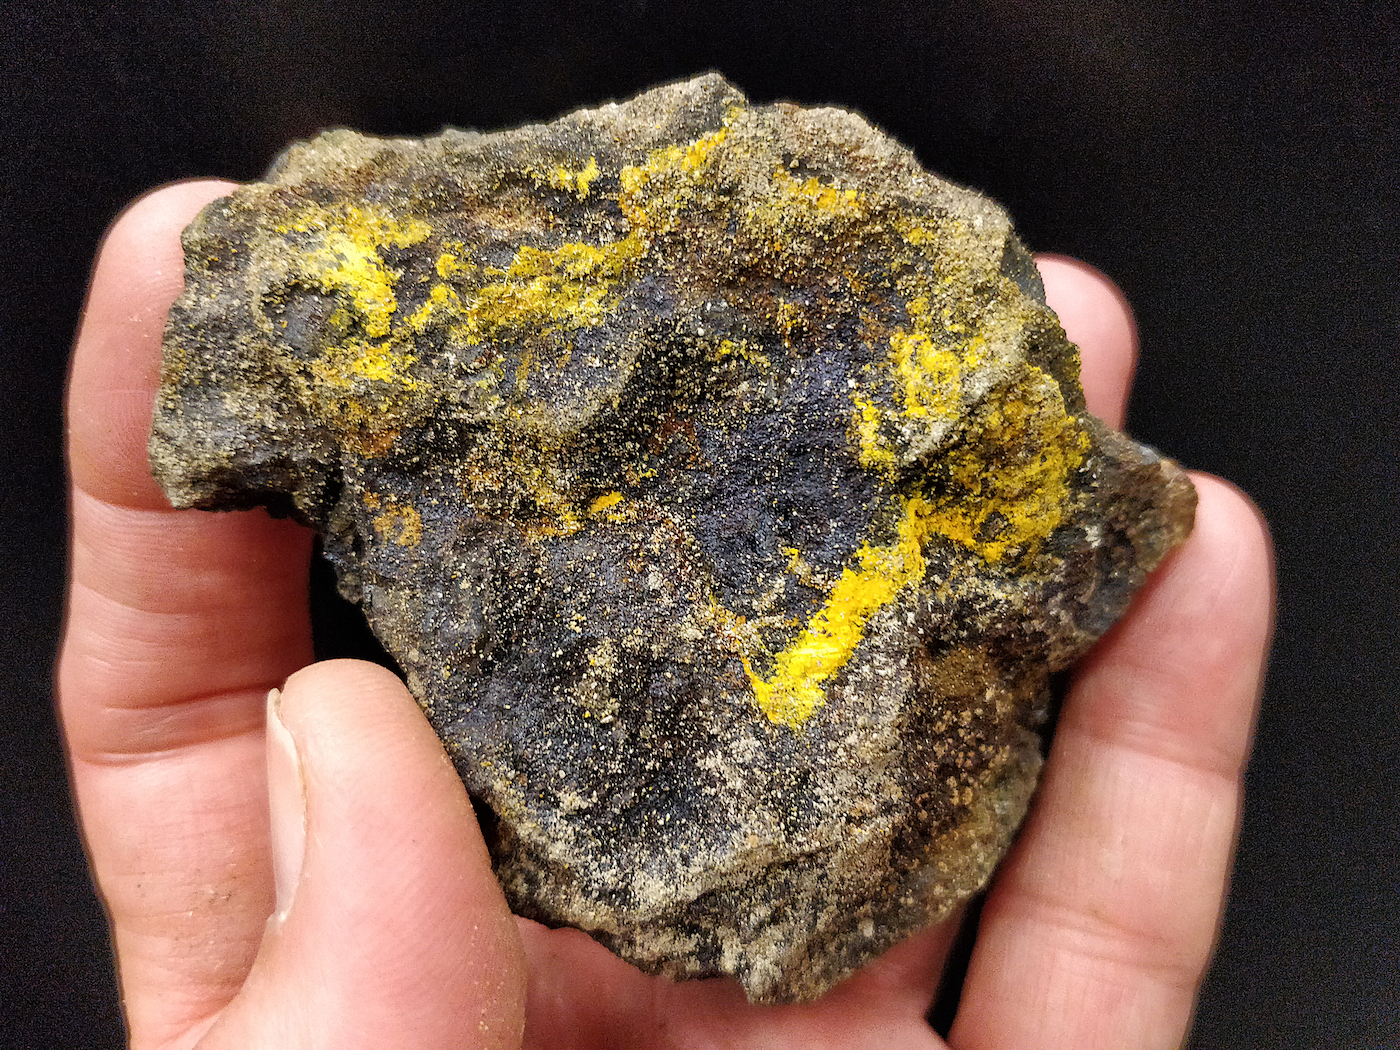 Yellow crystals of caseyite